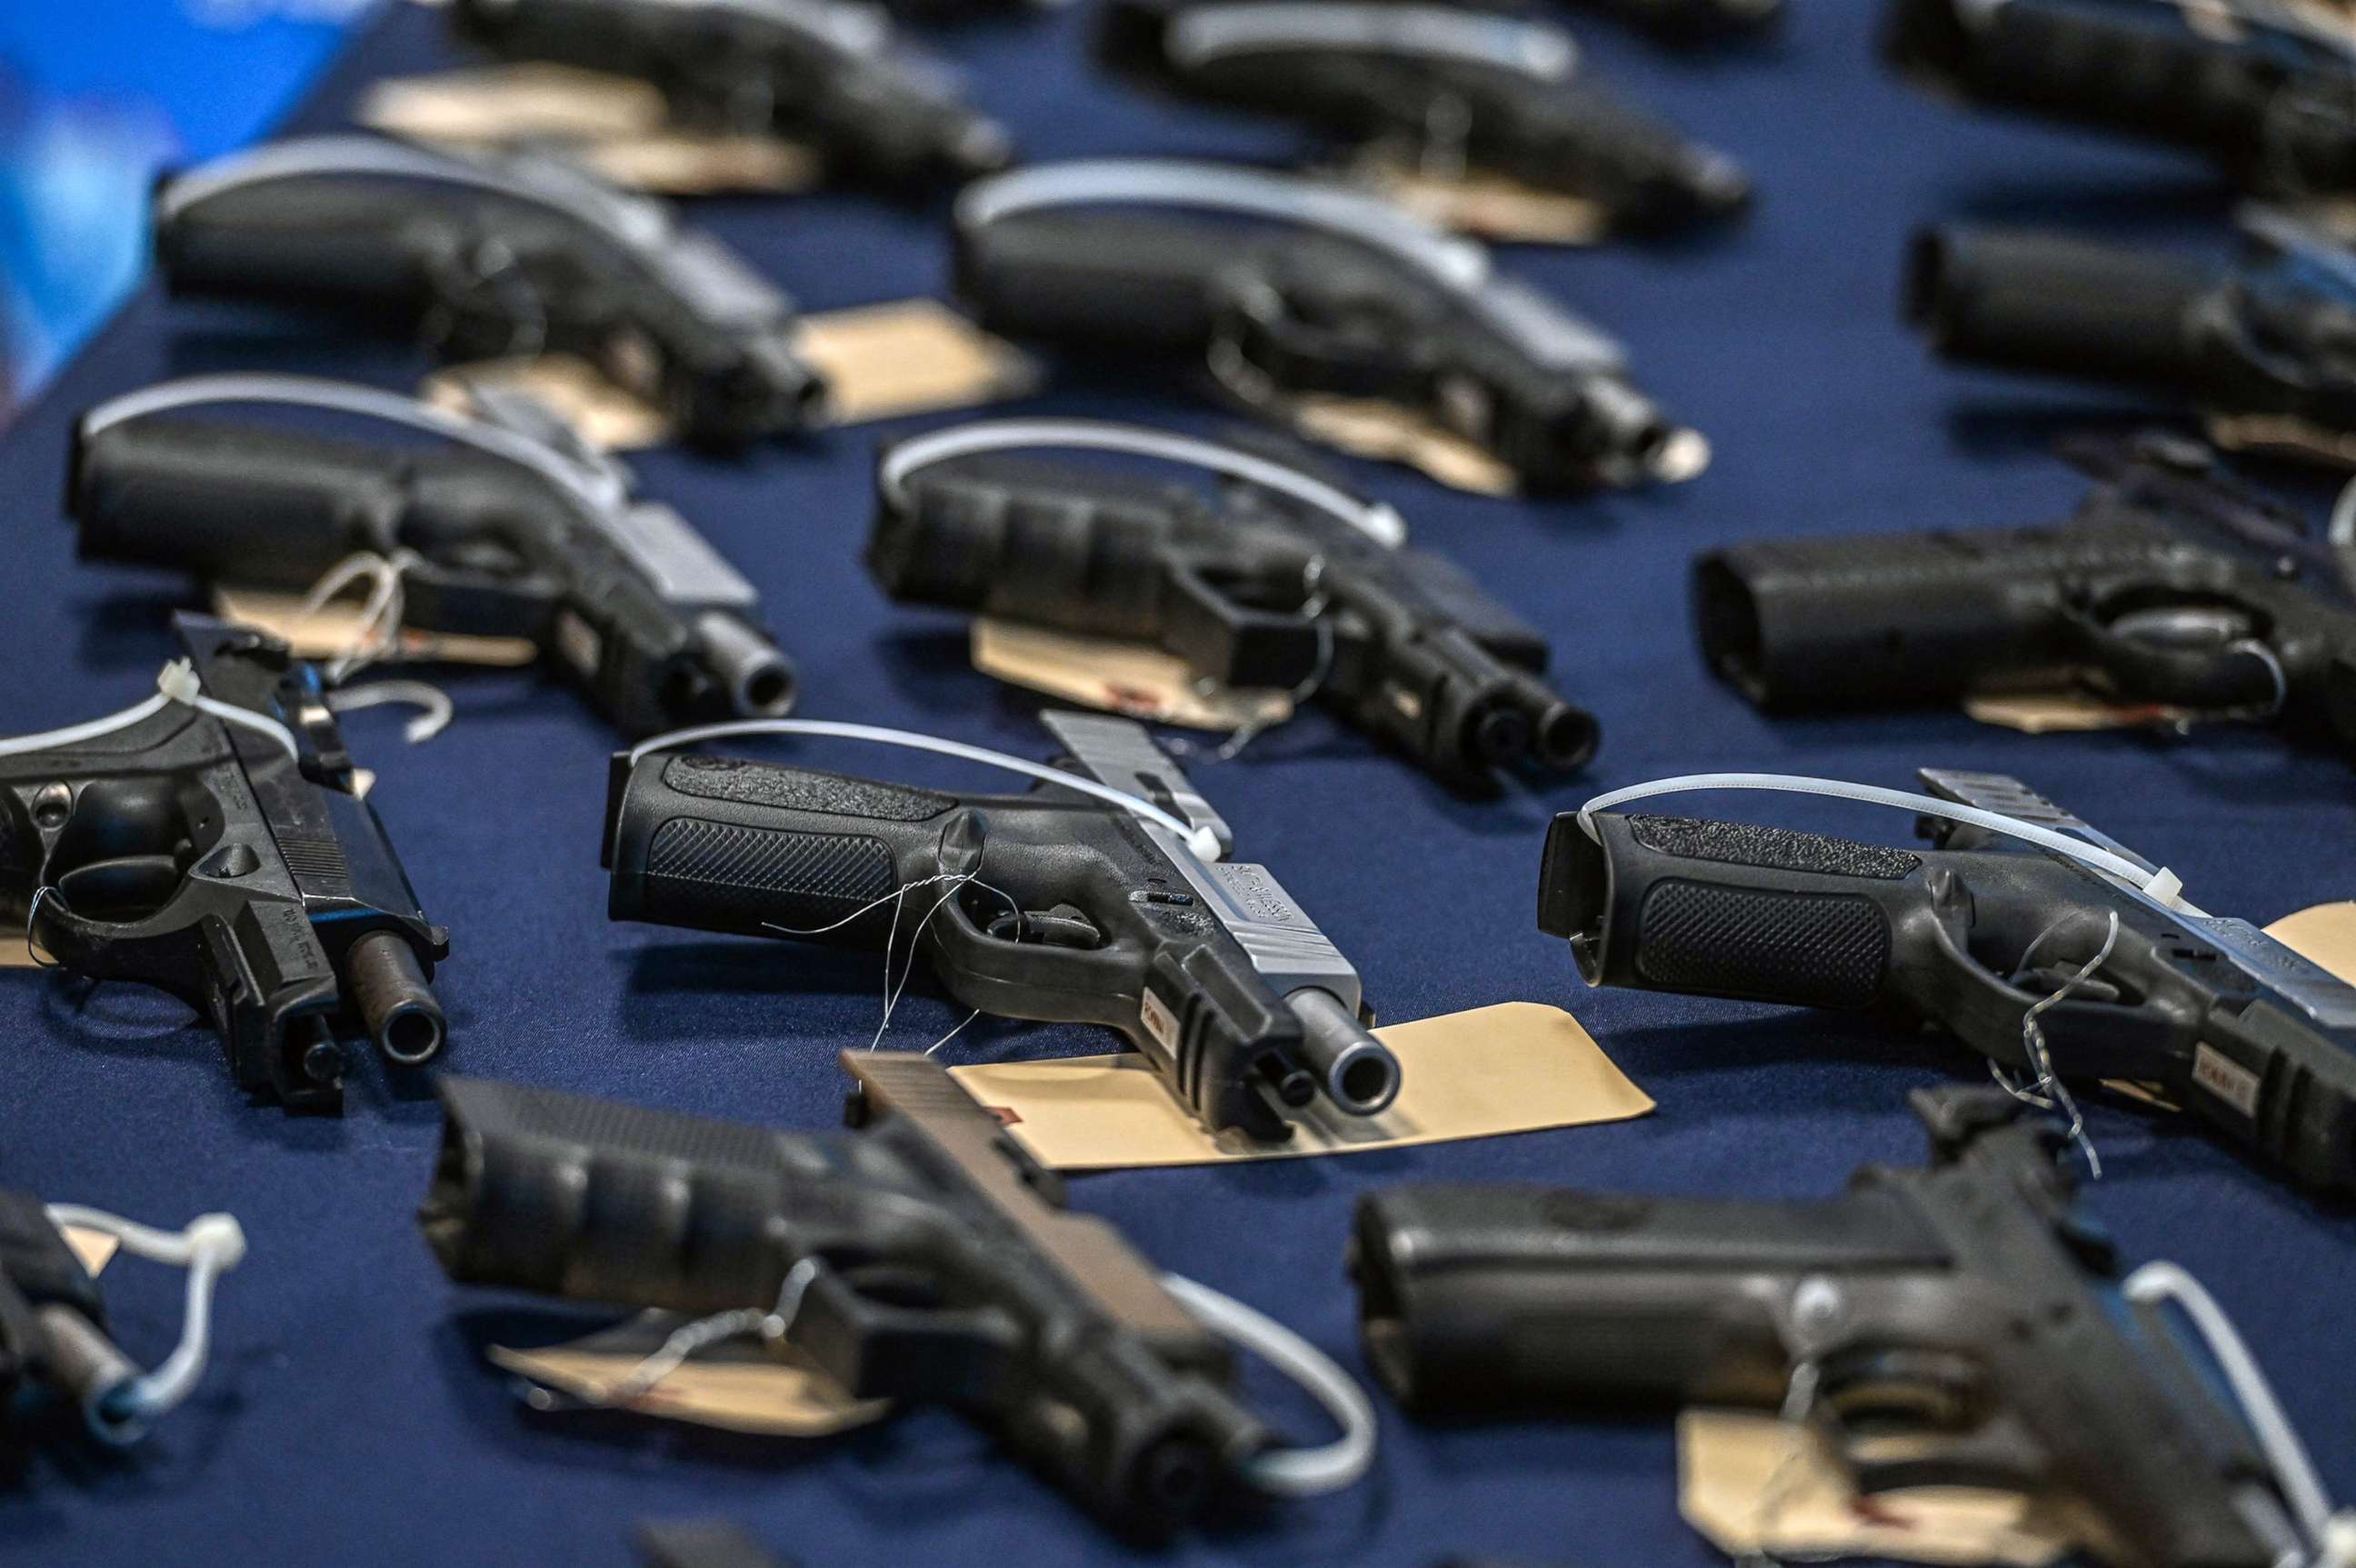 PHOTO: Guns seized in federal law enforcement actions are displayed during a press conference to announce a crackdown on firearms and ammunition smuggling to Haiti and the Caribbean at the Homeland Security Investigations offices in Miami, Aug. 17, 2022.